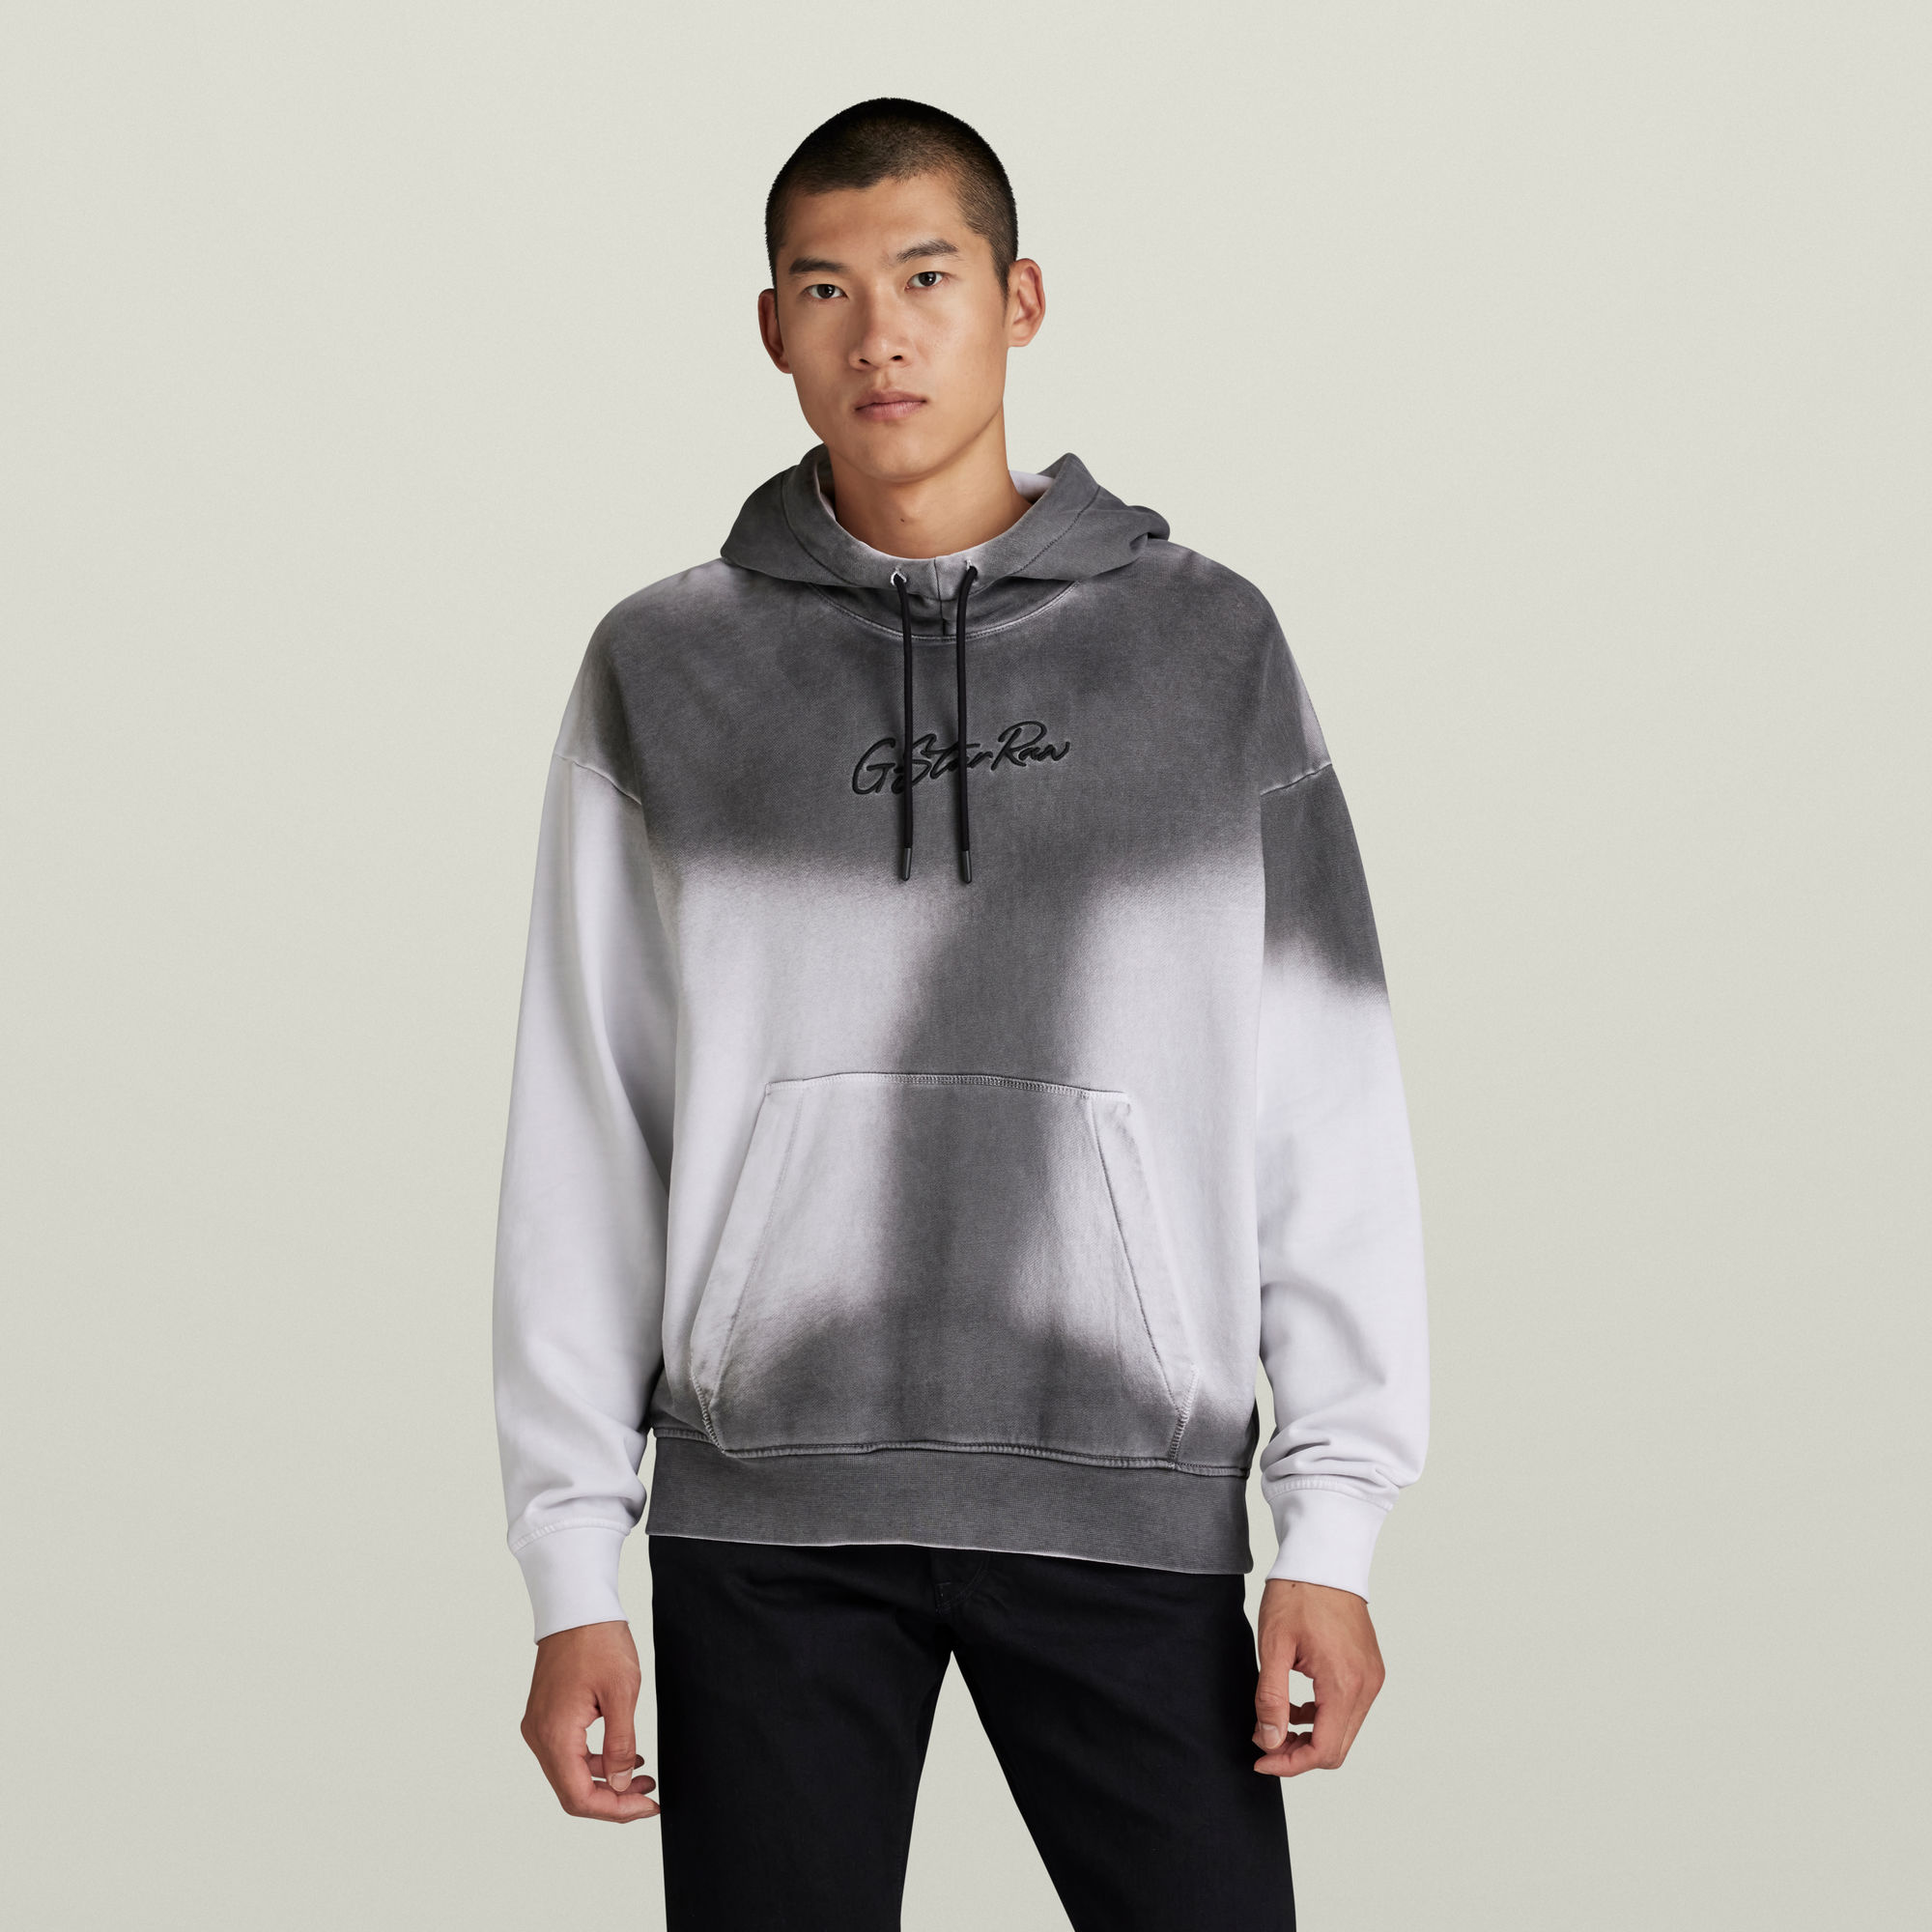 Hand Sprayed Hooded Loose Sweater | White | G-Star RAW® US